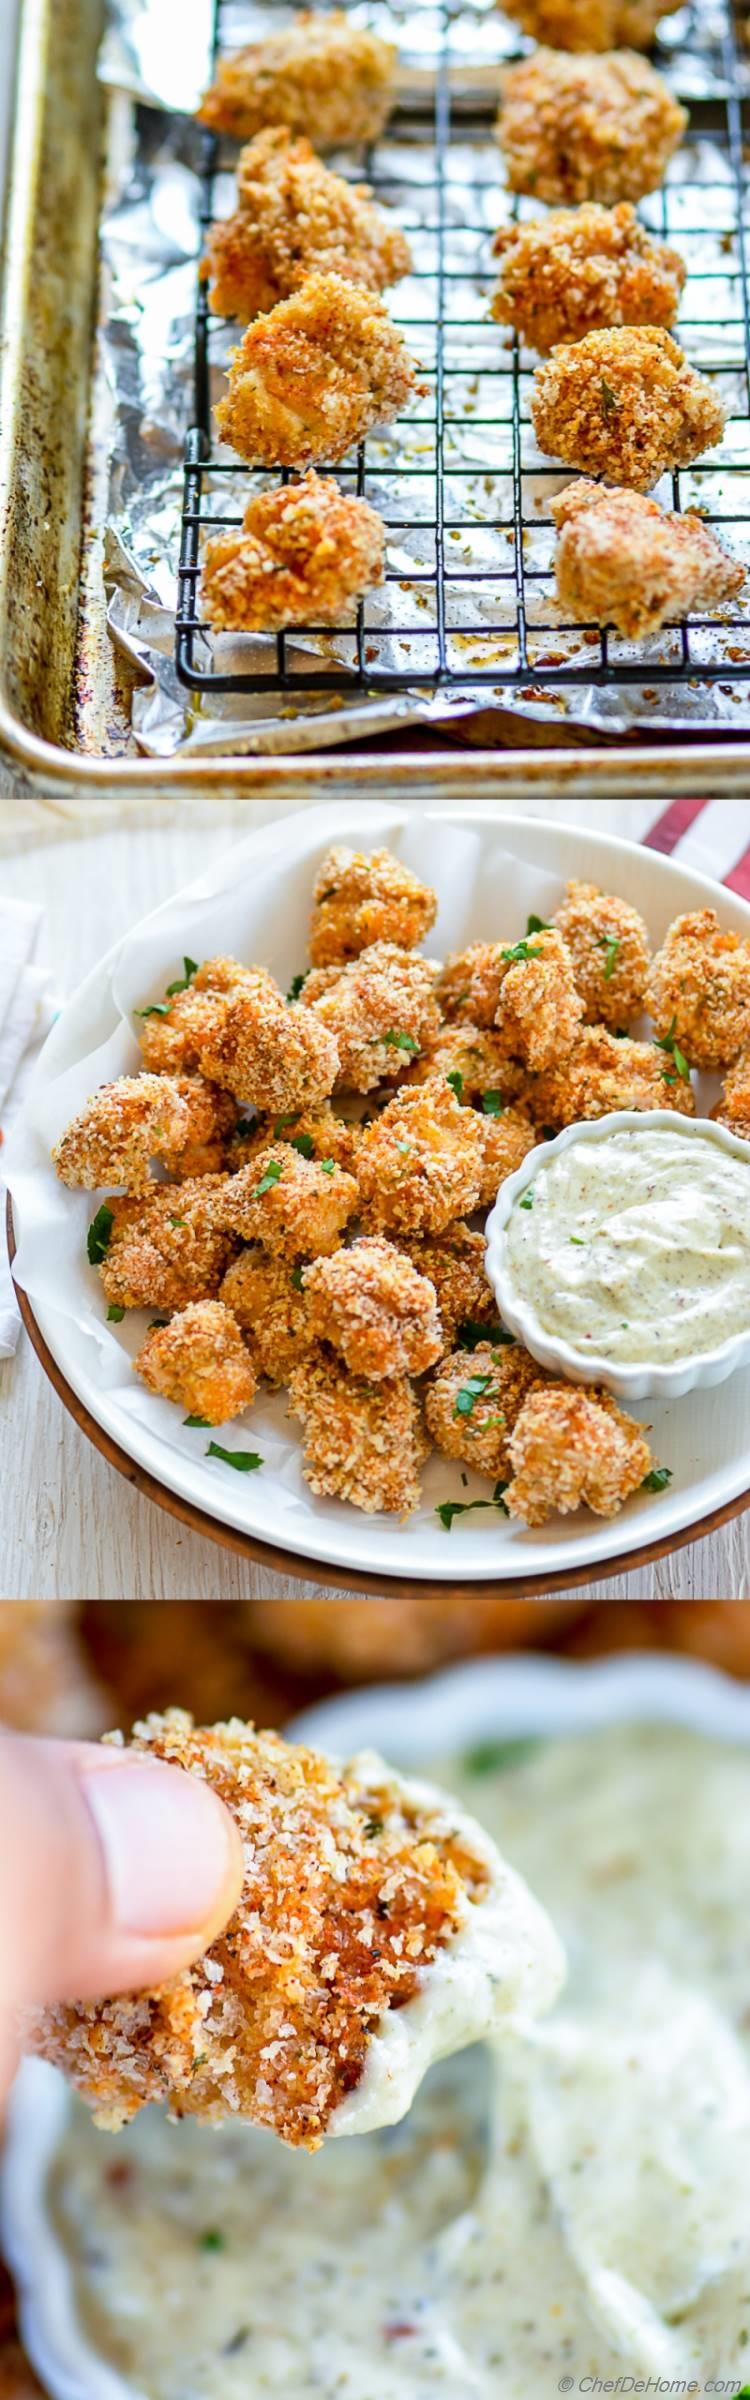 Extra Moist Best Baked Buttermilk Popcorn Chicken Low in Calories yet Crunchy and Scrumptious | chefdehome.com